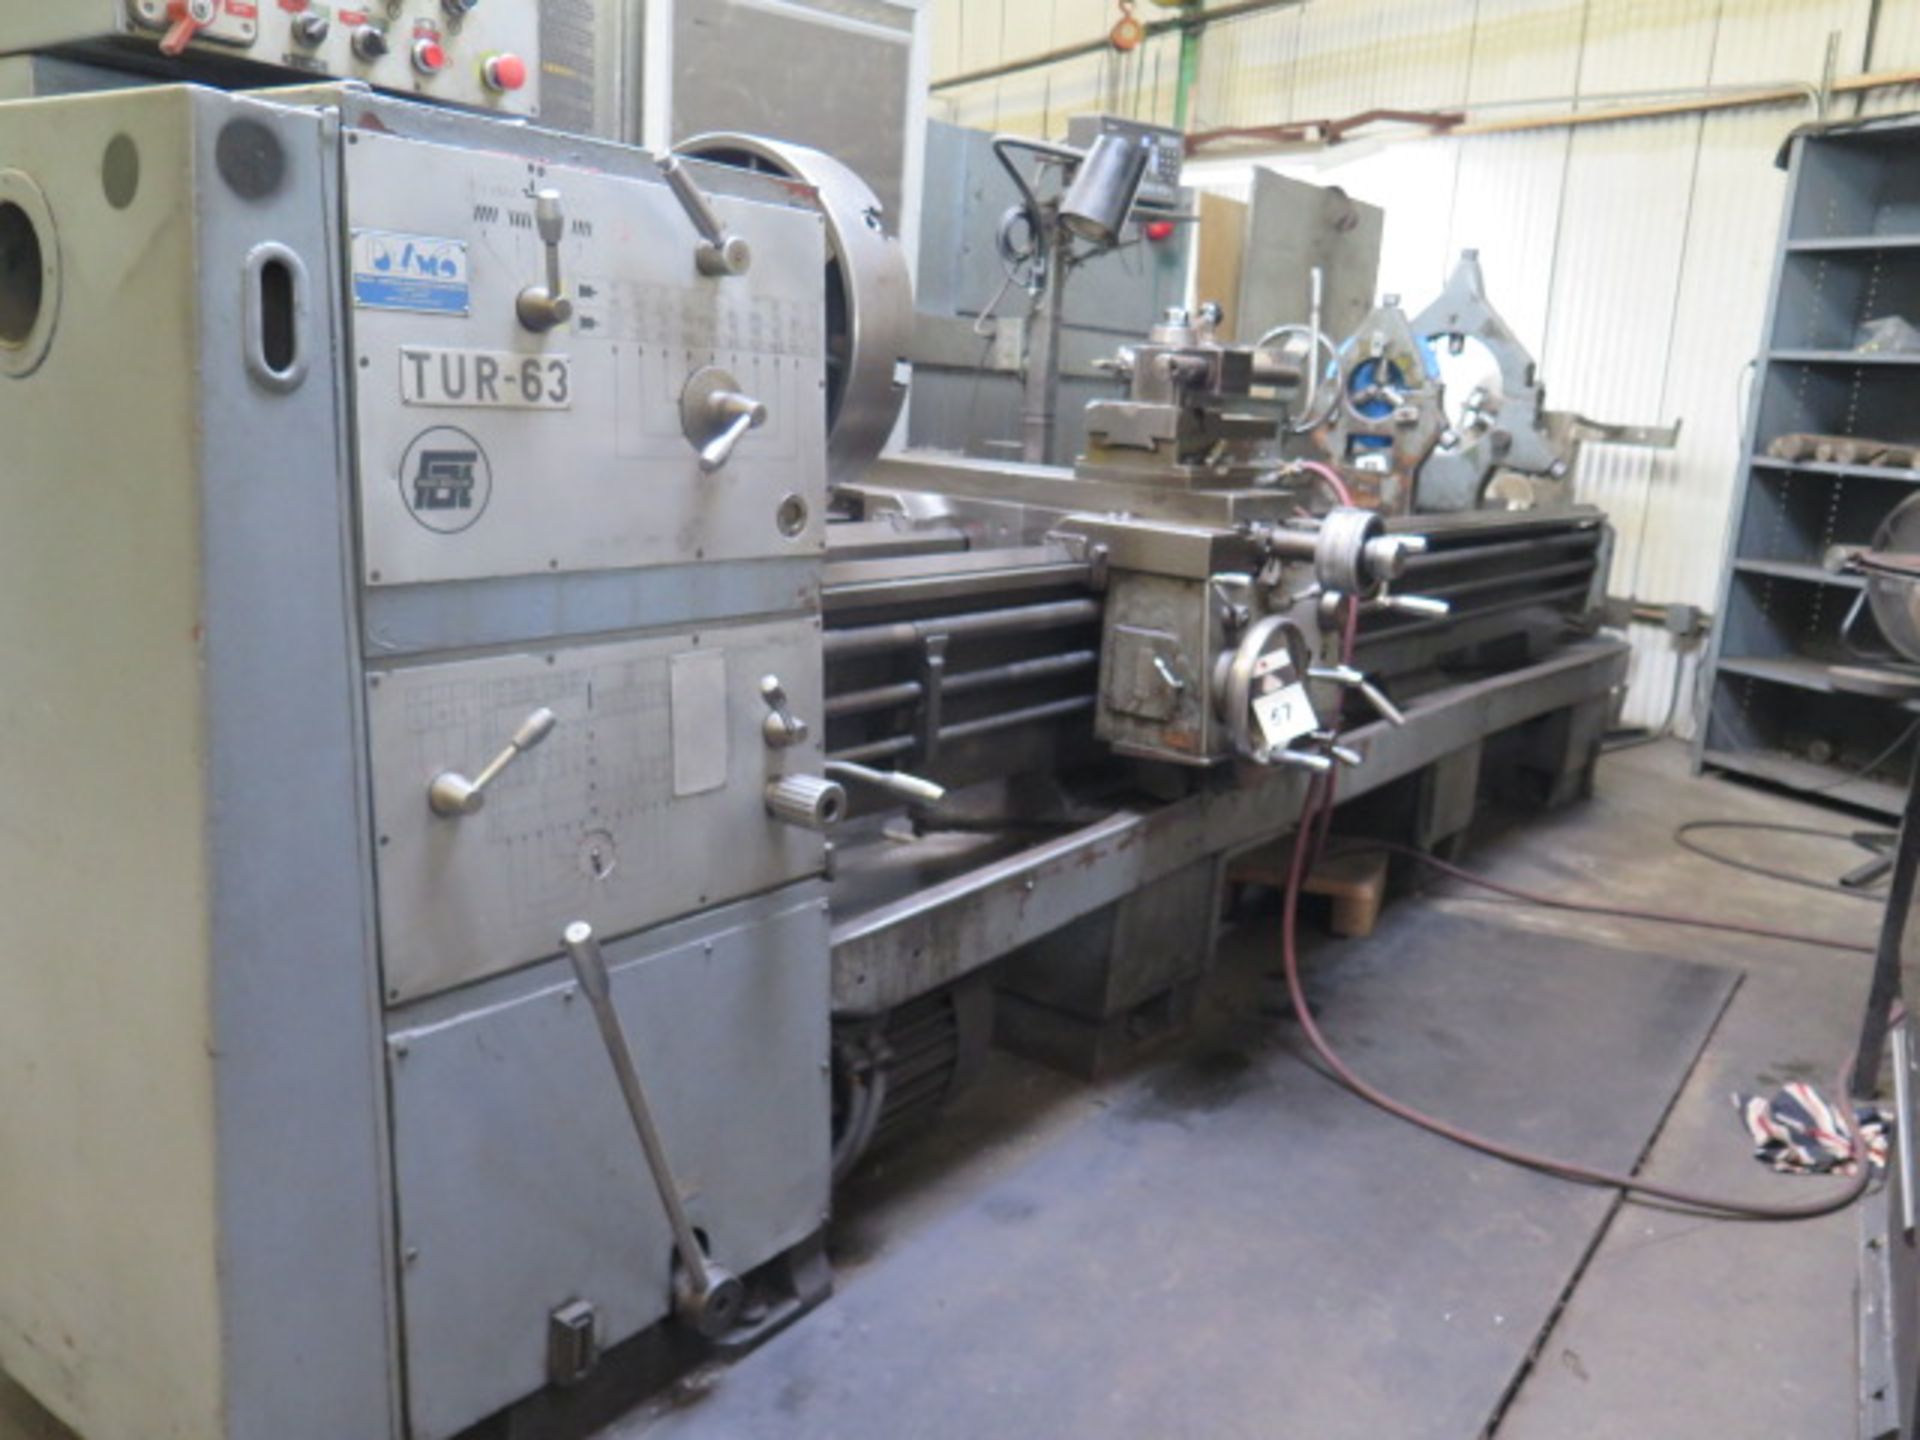 Polamco TUR-63 Big-Bore 25” x 120” Geared Head Gap Bed Lathe s/n 41189 w/ Mitutoyo DRO, SOLD AS IS - Image 2 of 14